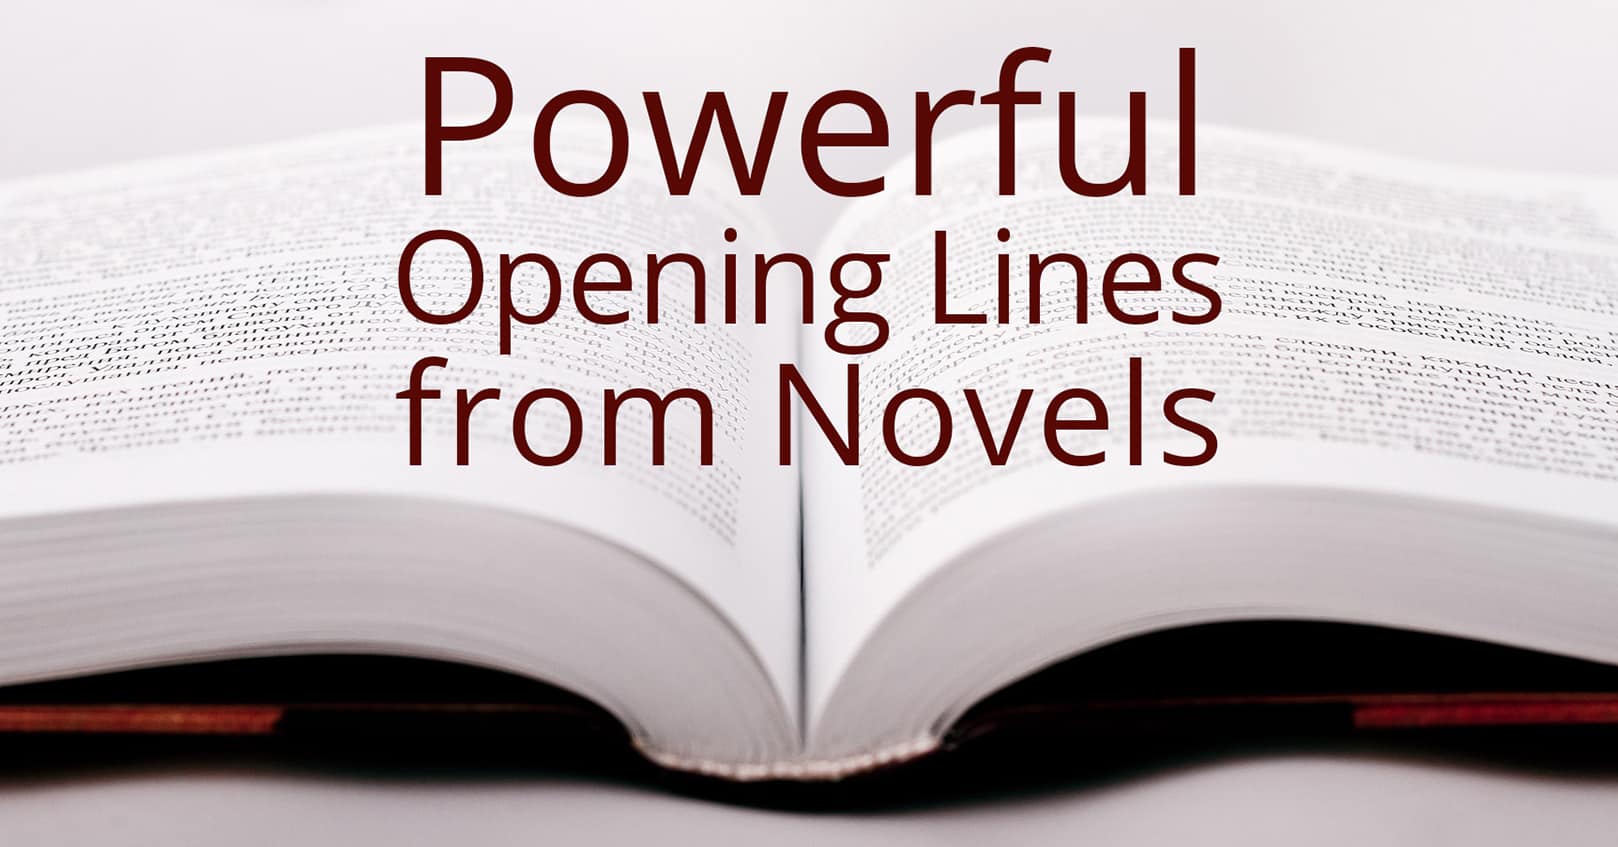 22 Powerful Opening Lines from Novels